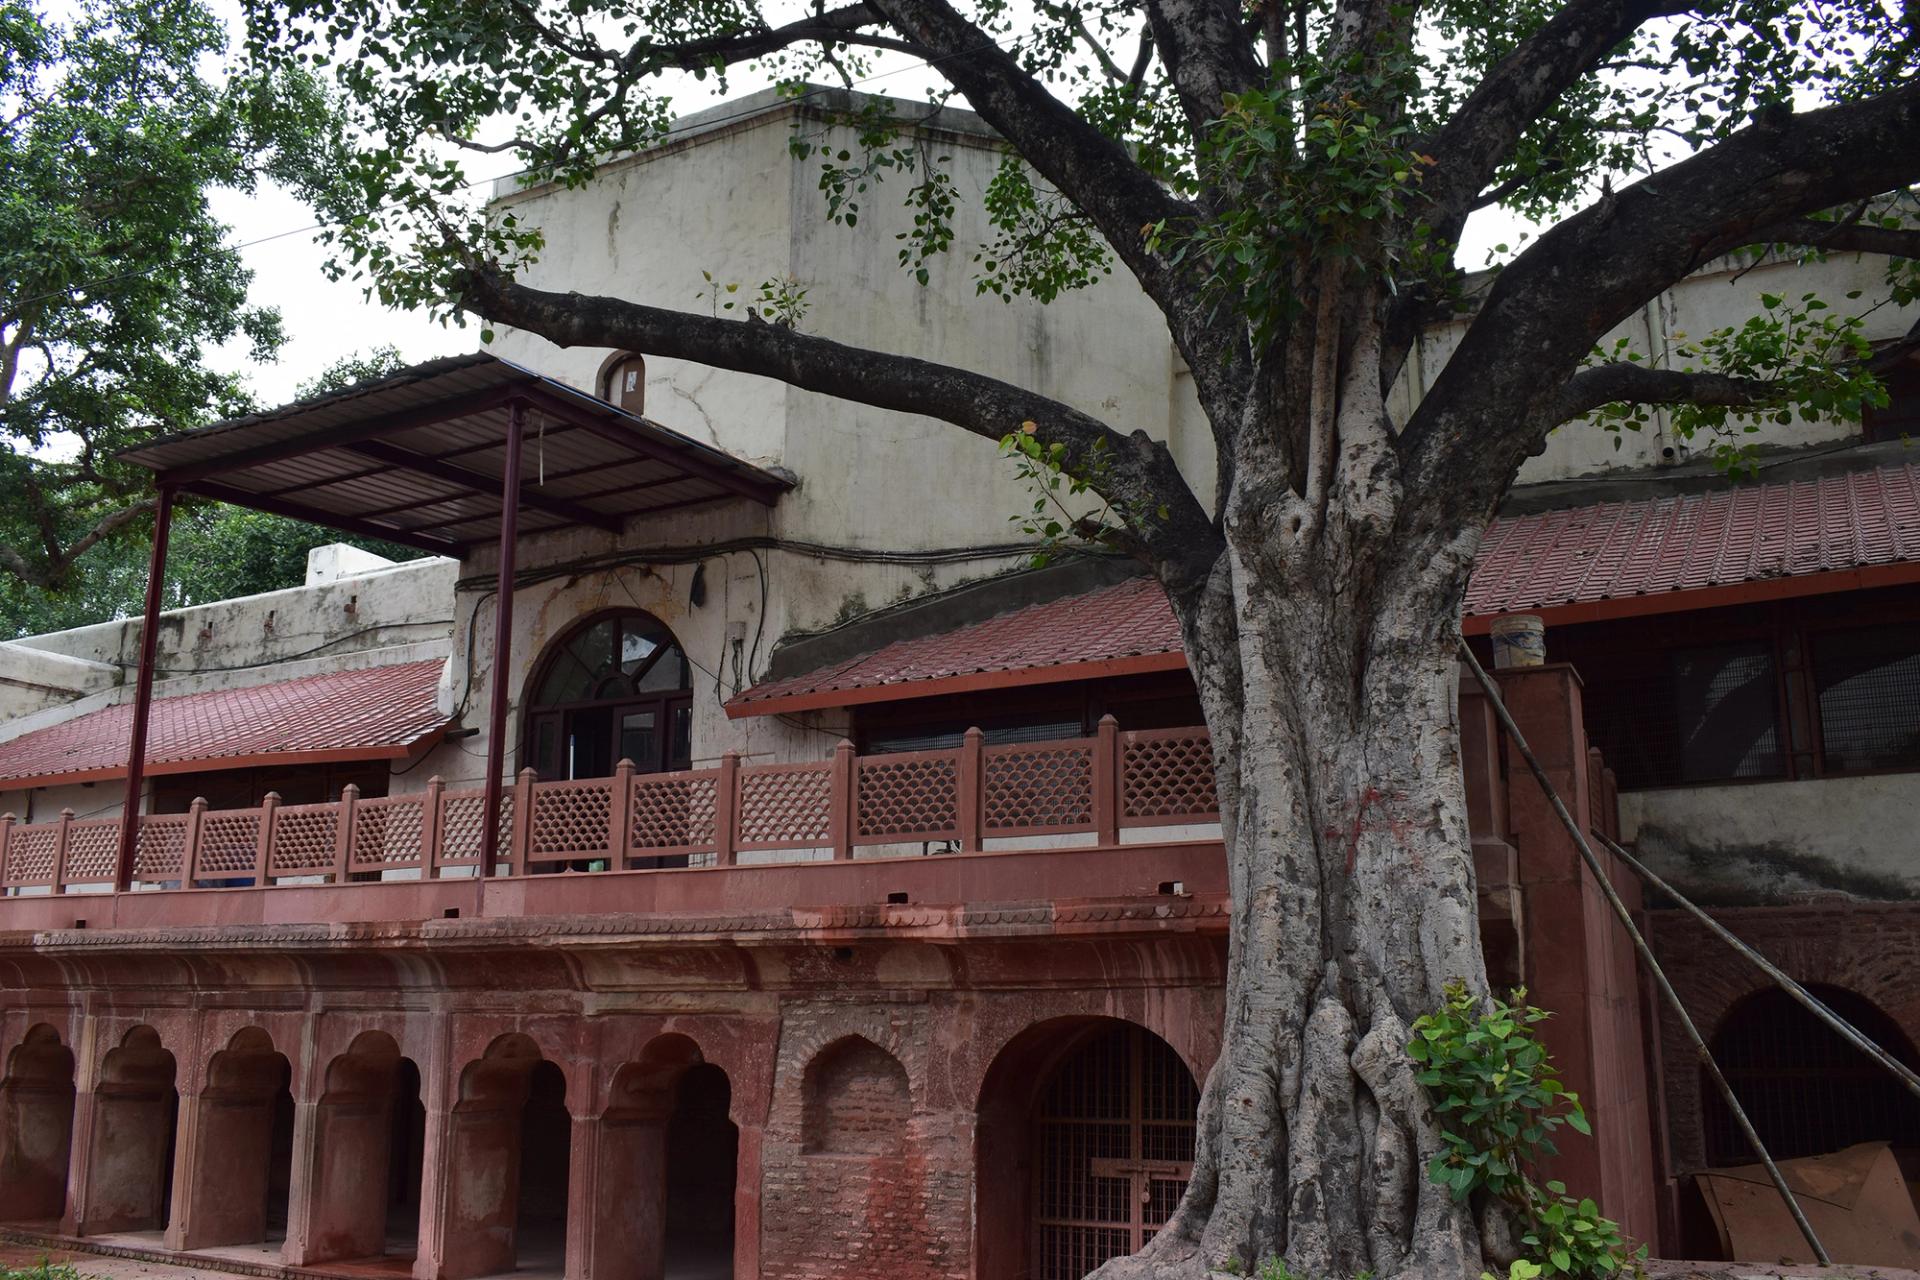 The Partition Museum in Delhi will be housed in the Dara Shikoh Library building. Photo: courtesy of the Partition Museum